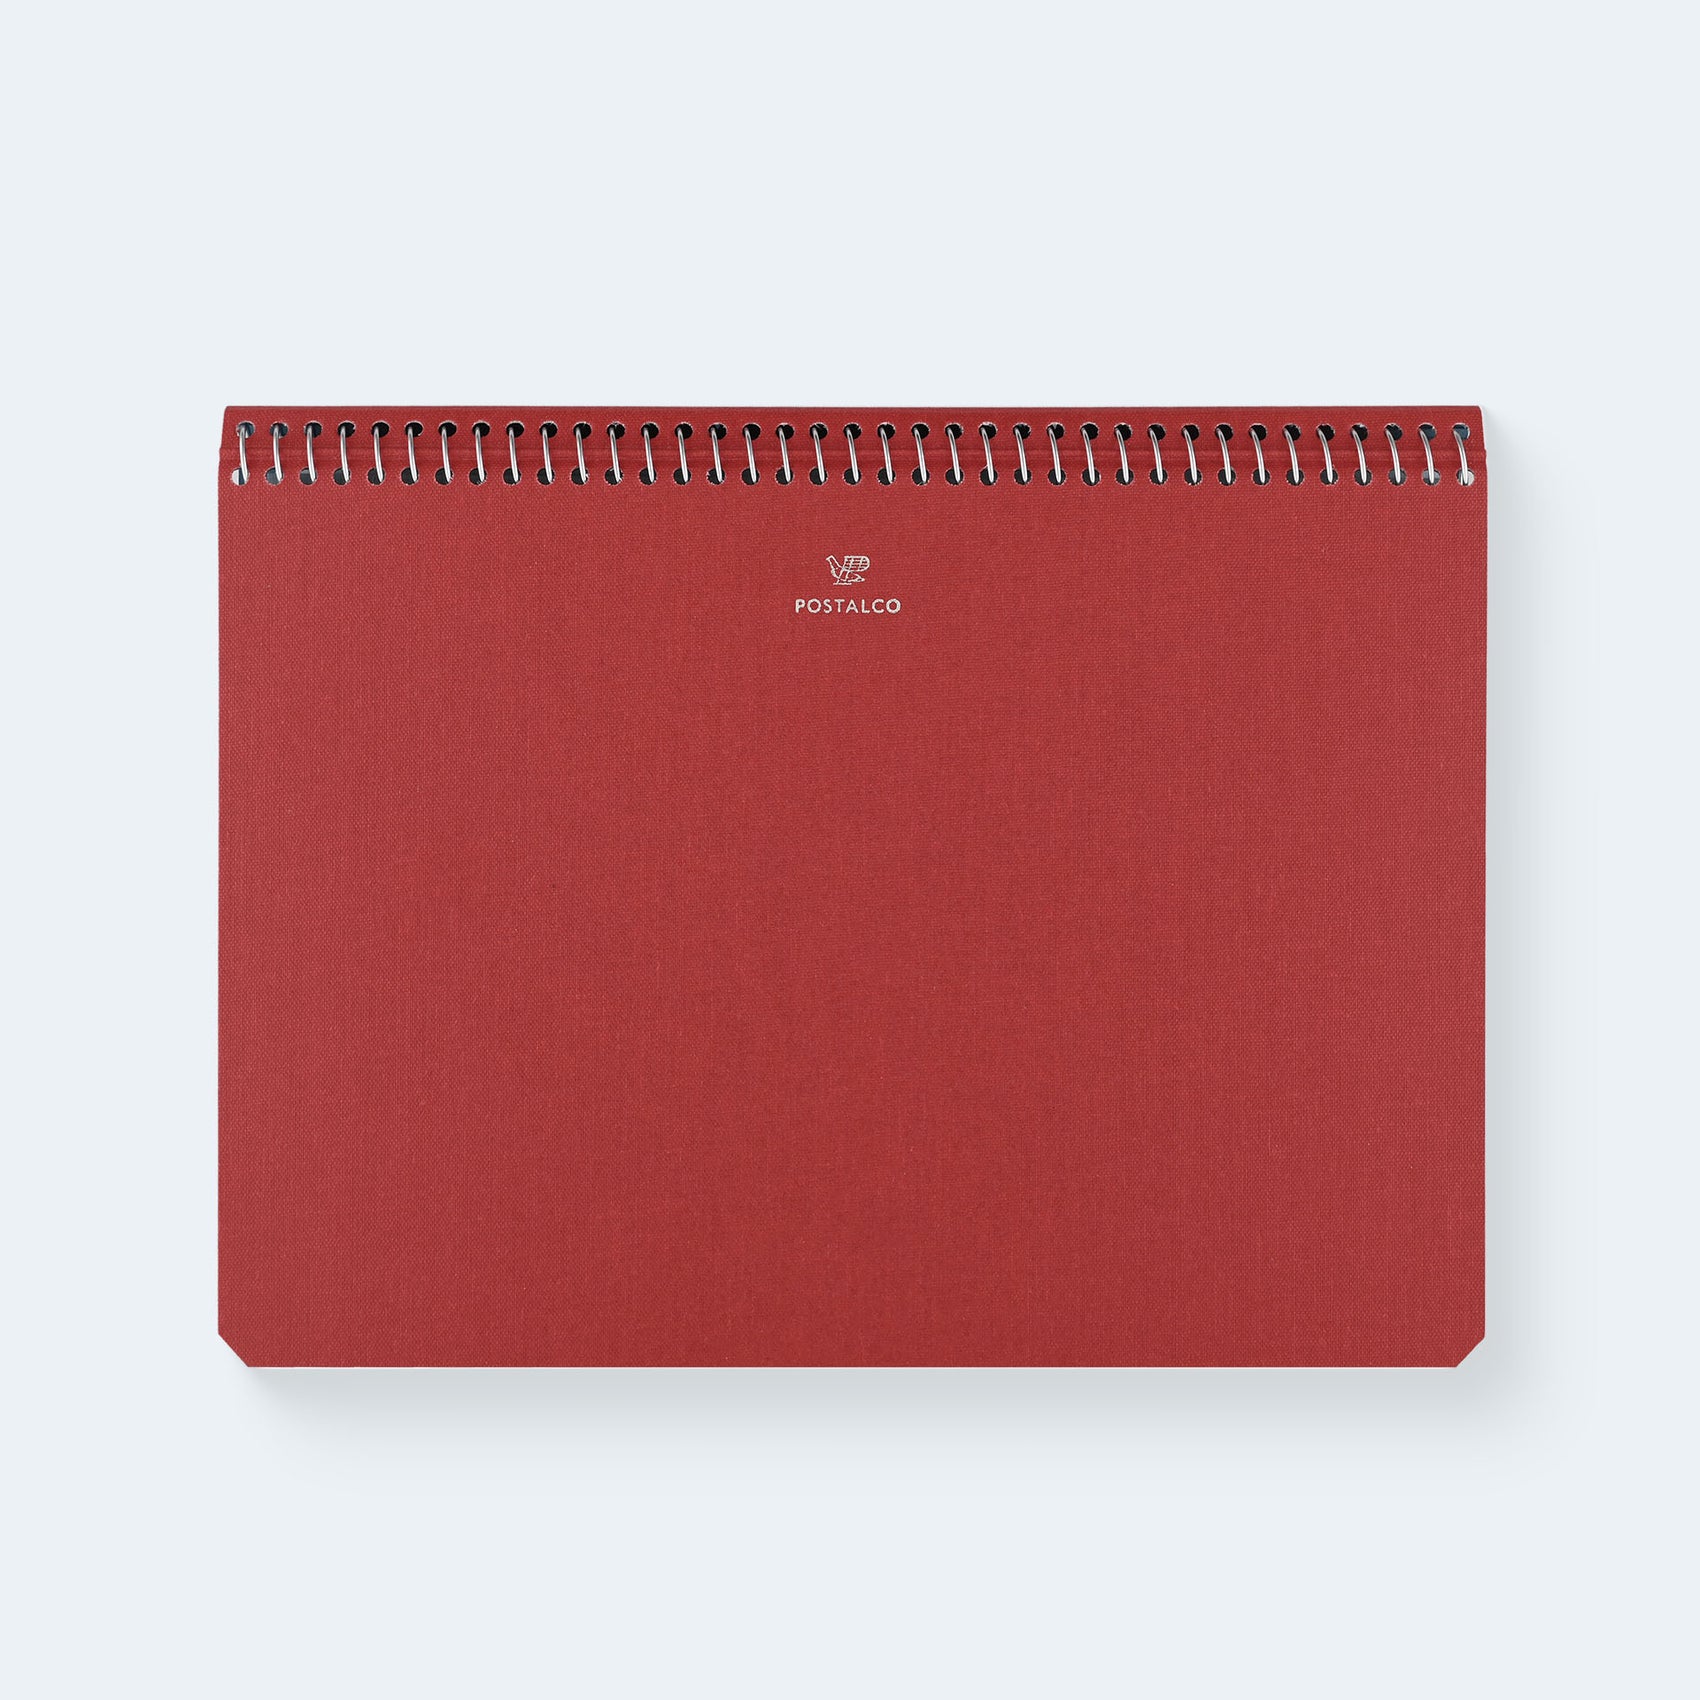 Postalco Notebook Signal Red Pingraph A5